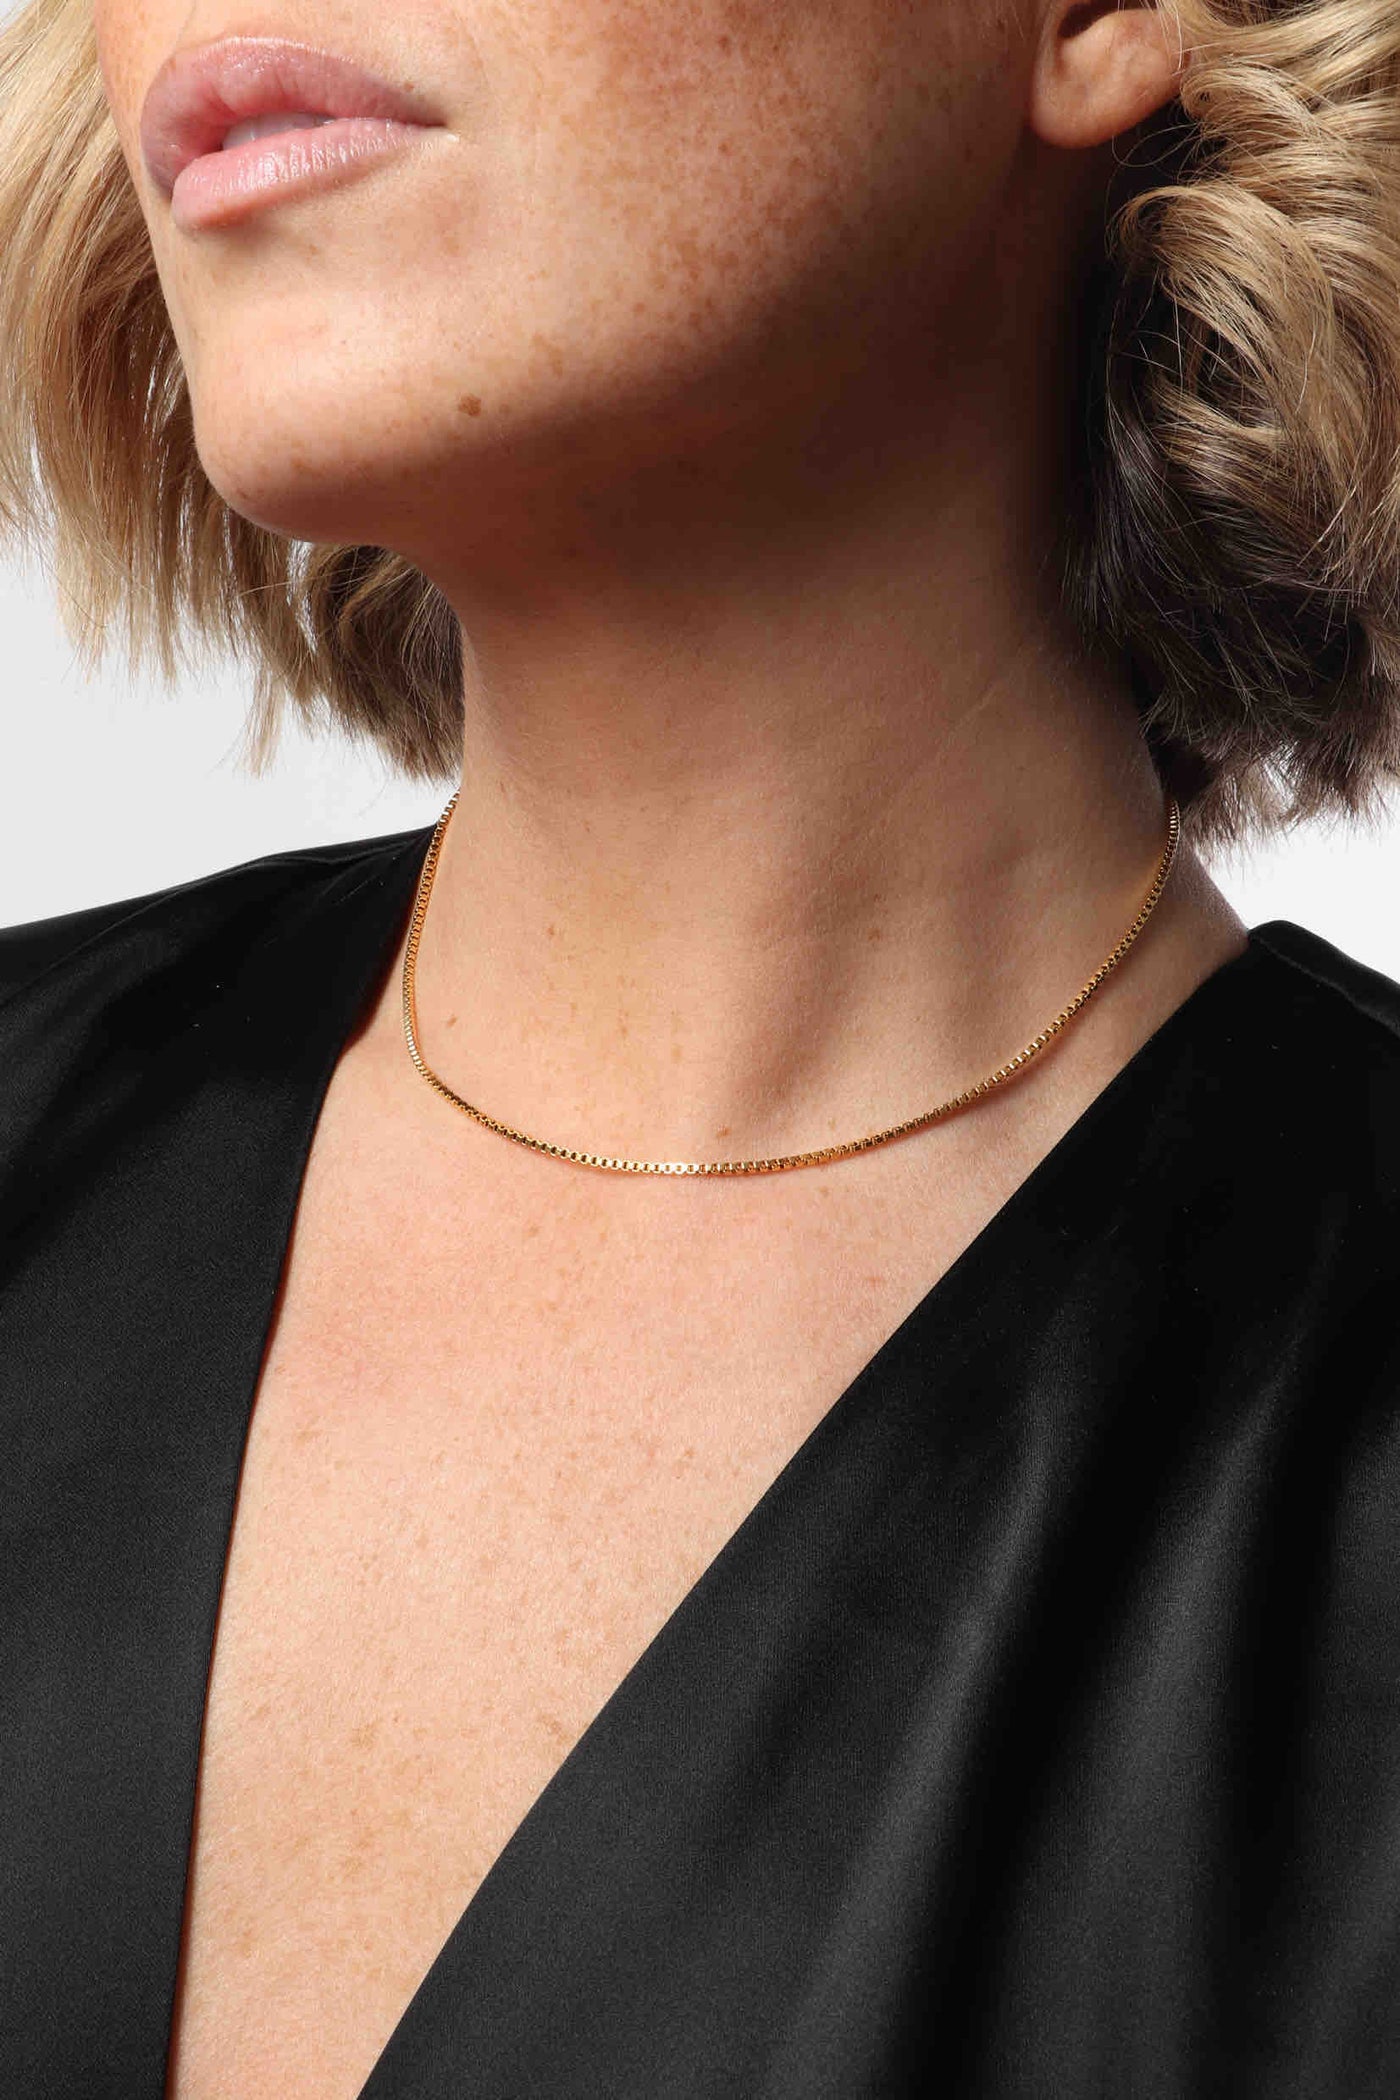 Marrin Costello wearing Marrin Costello Jewelry Nile Choker delicate dainty box link chain with lobster clasp closure and extender. Waterproof, sustainable, hypoallergenic. 14k gold plated stainless steel.